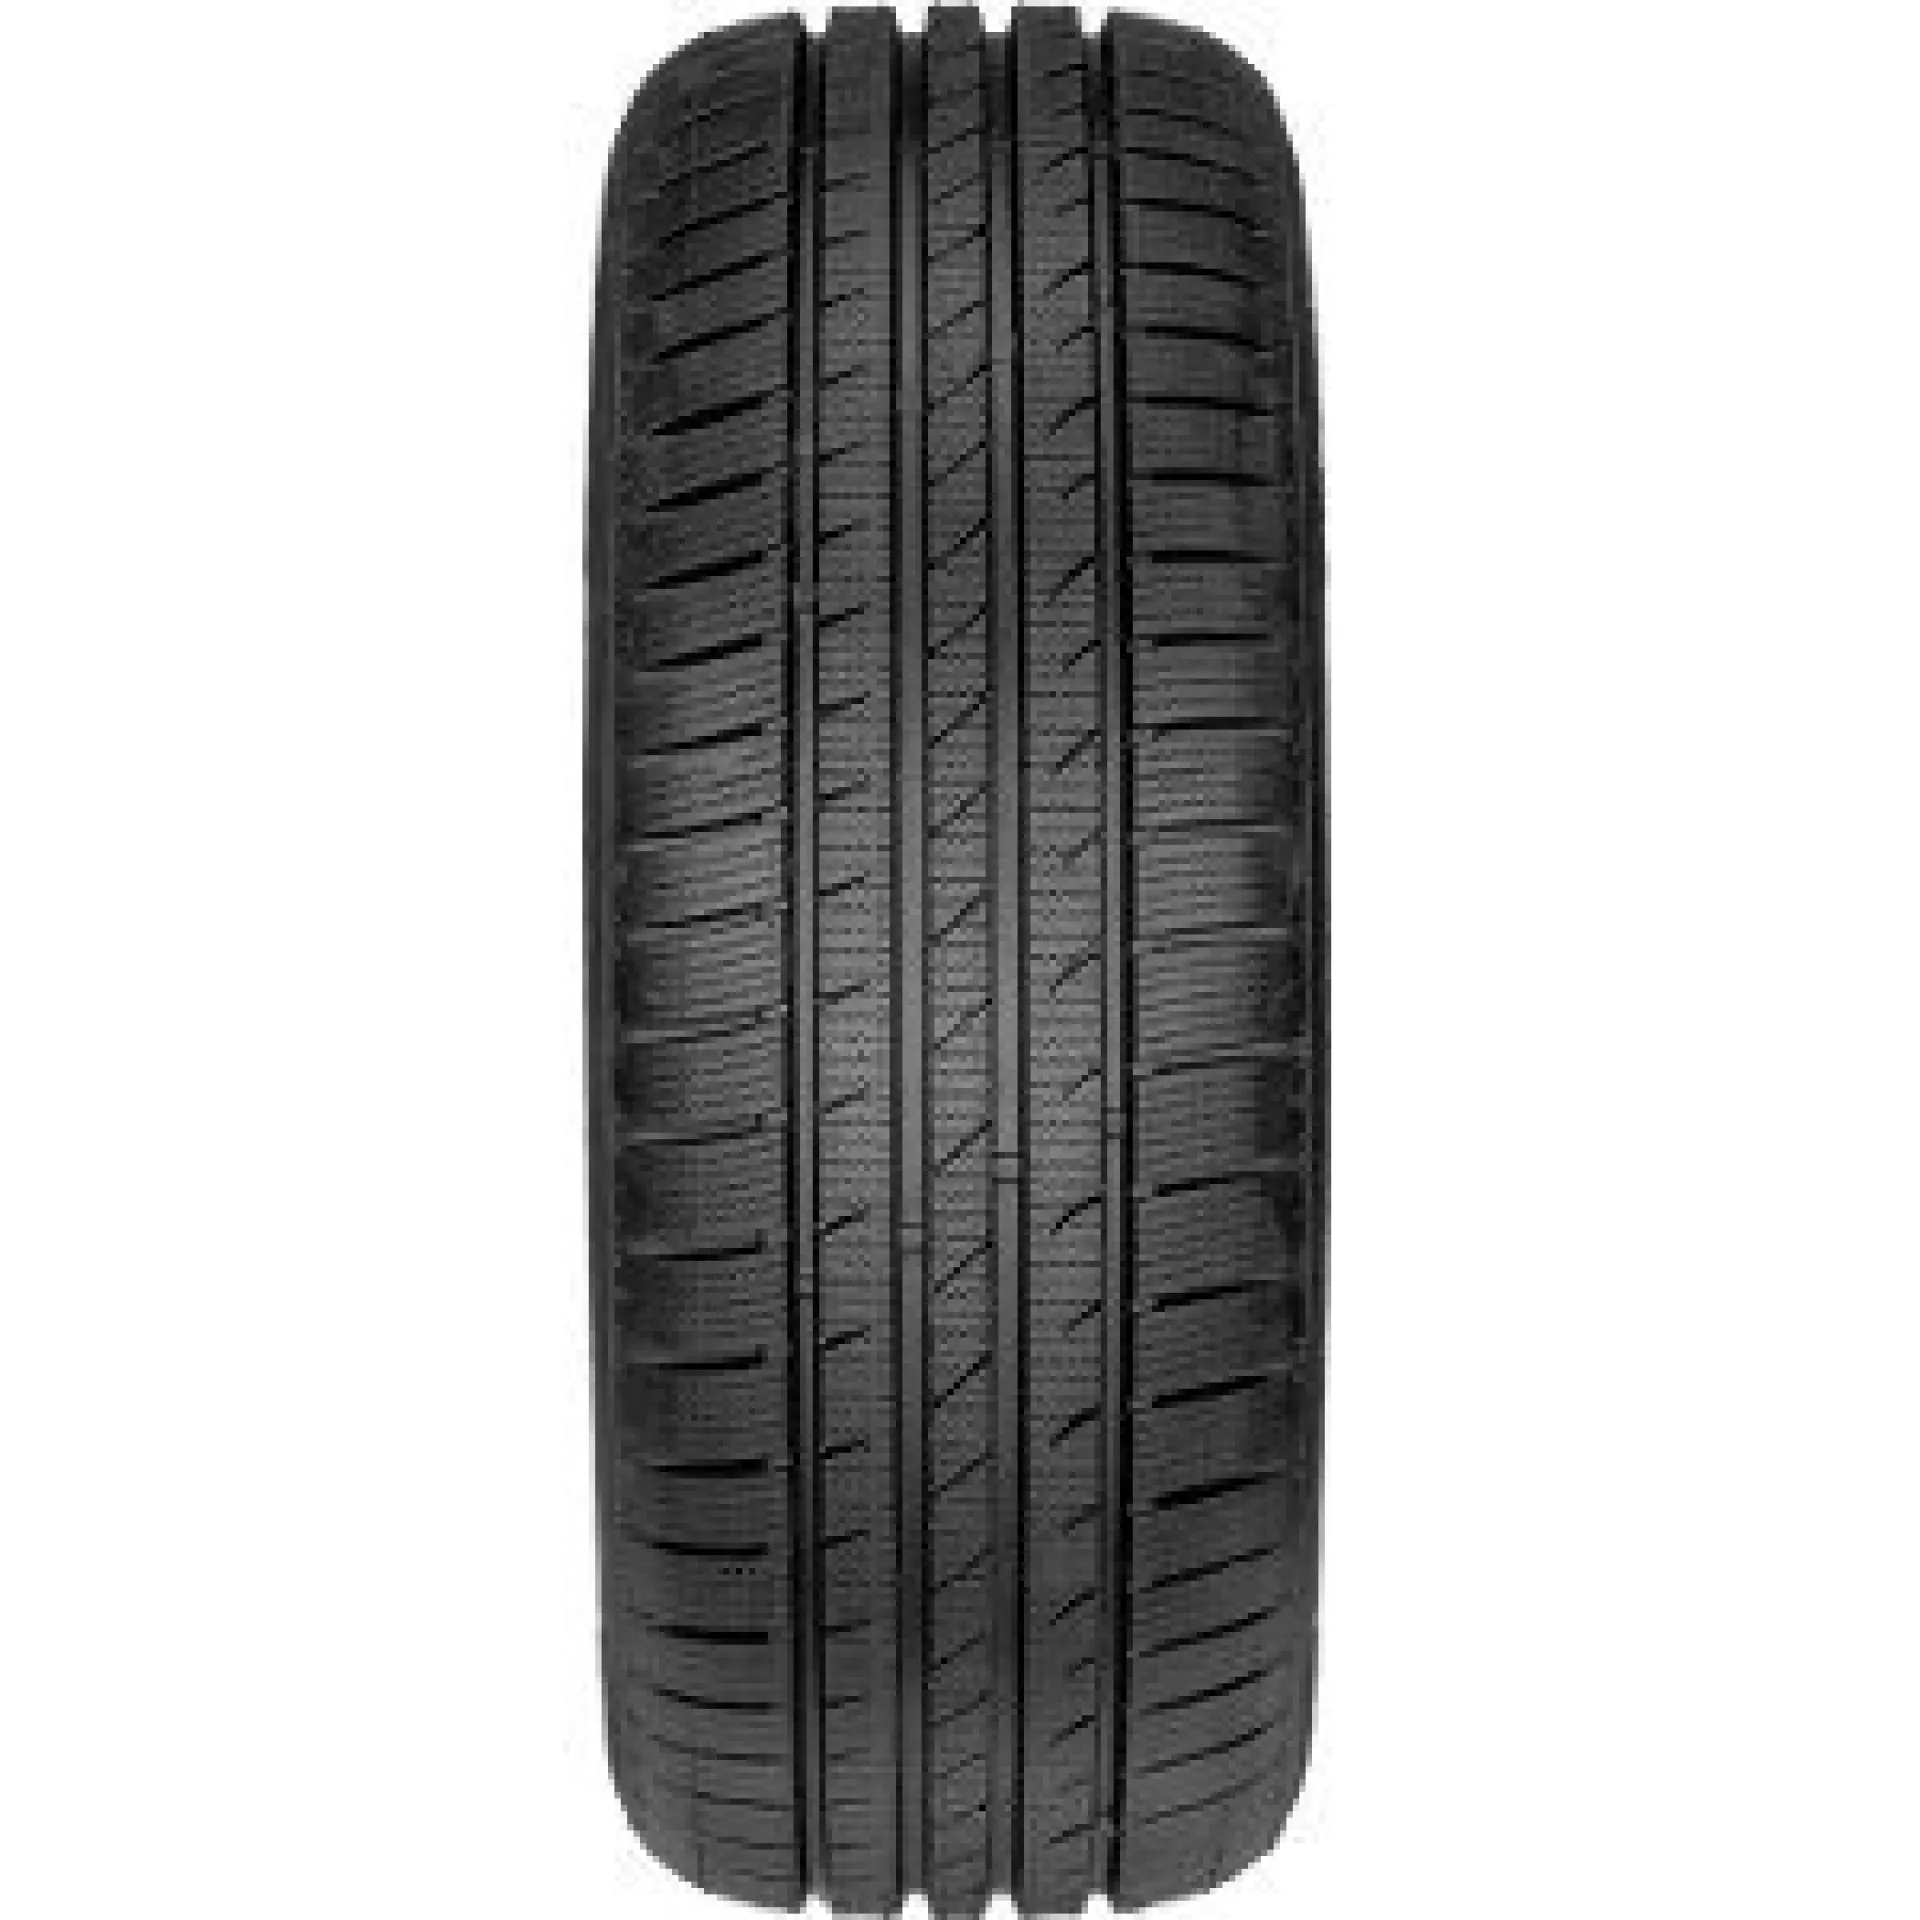 Fortuna Gowin UHP 225/55R16 99H XL